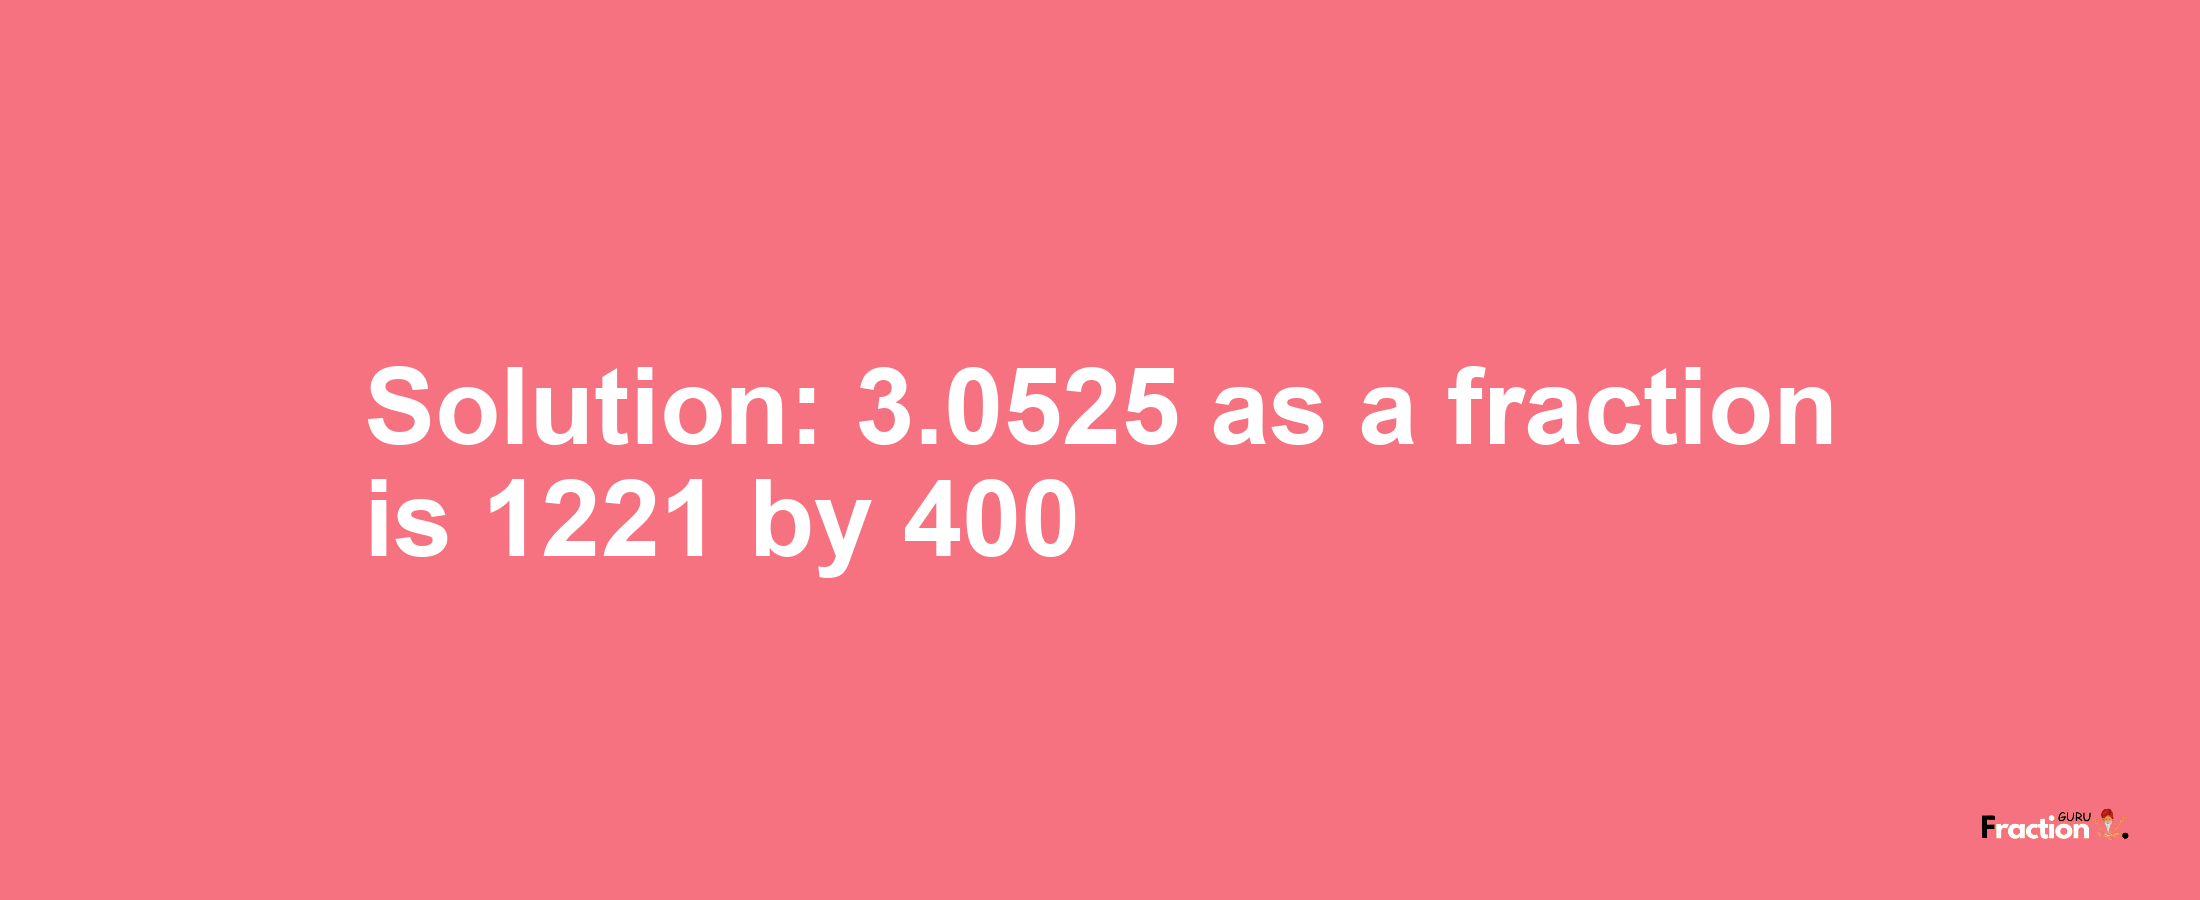 Solution:3.0525 as a fraction is 1221/400